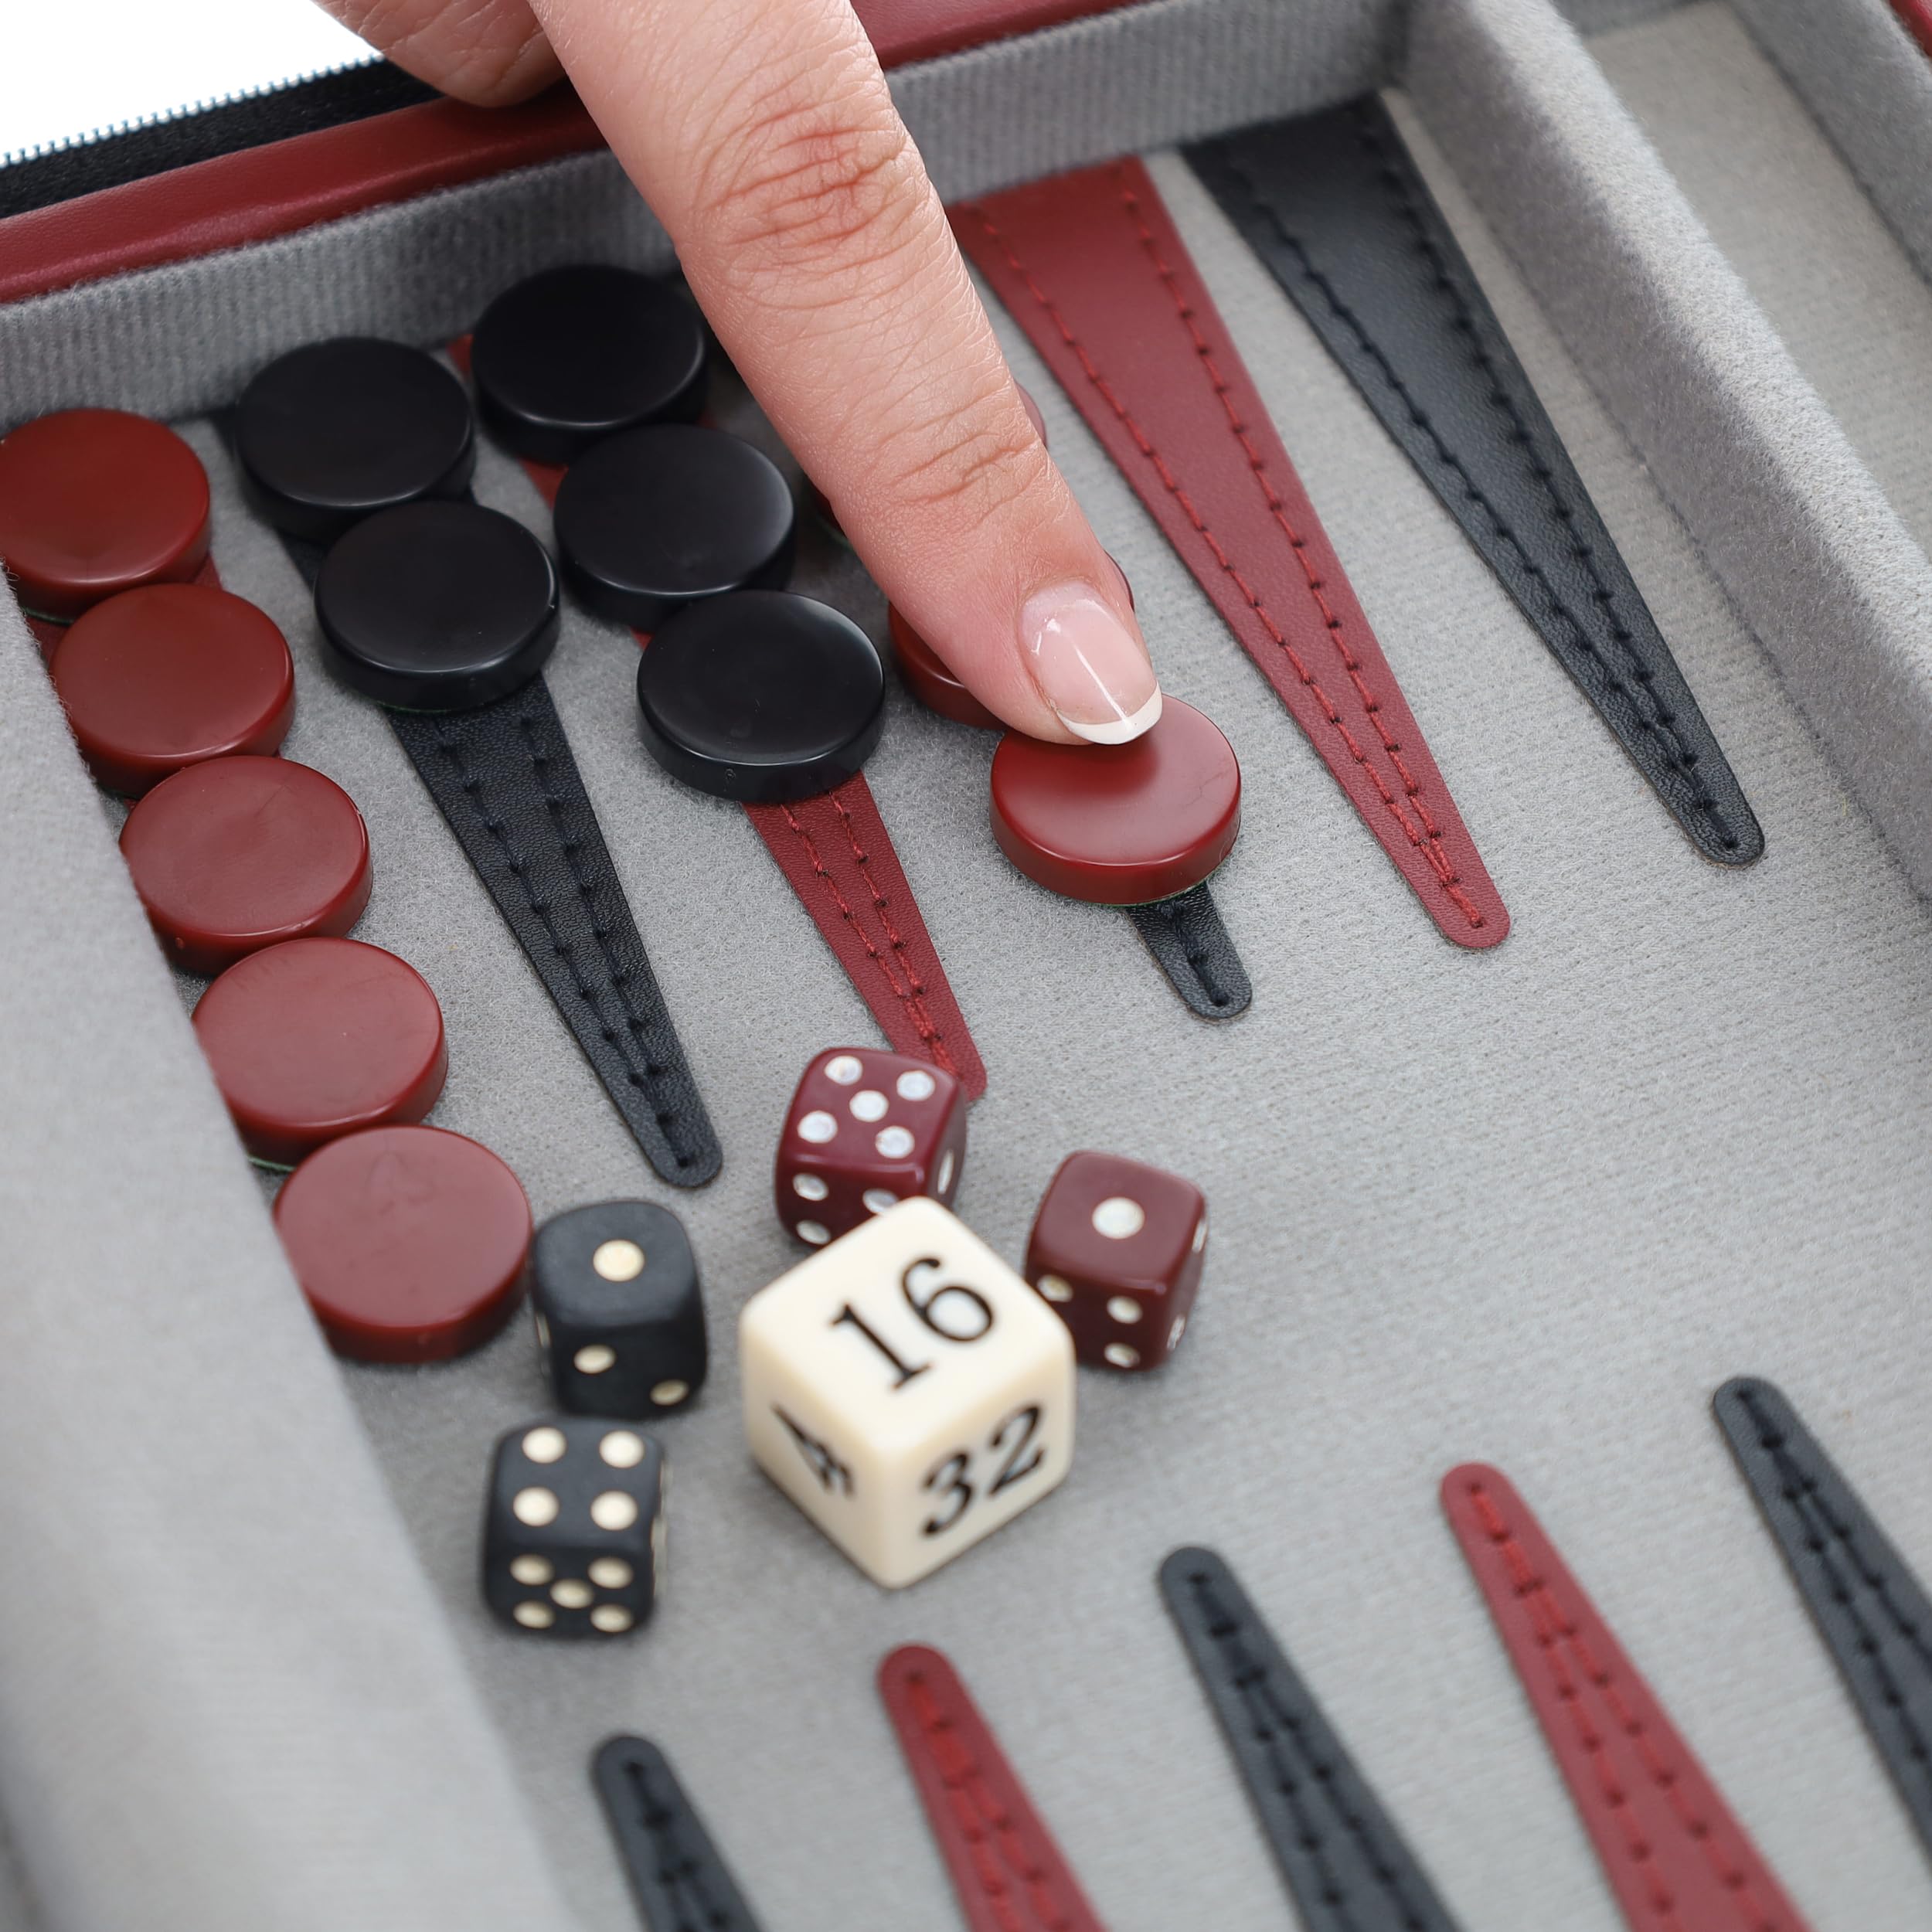 WE Games Backgammon Set, Board Games for Adults - Travel Games - Magnetic with Burgundy Leatherette Backgammon Board and Carrying Strap - Travel Backgammon Sets for Adults